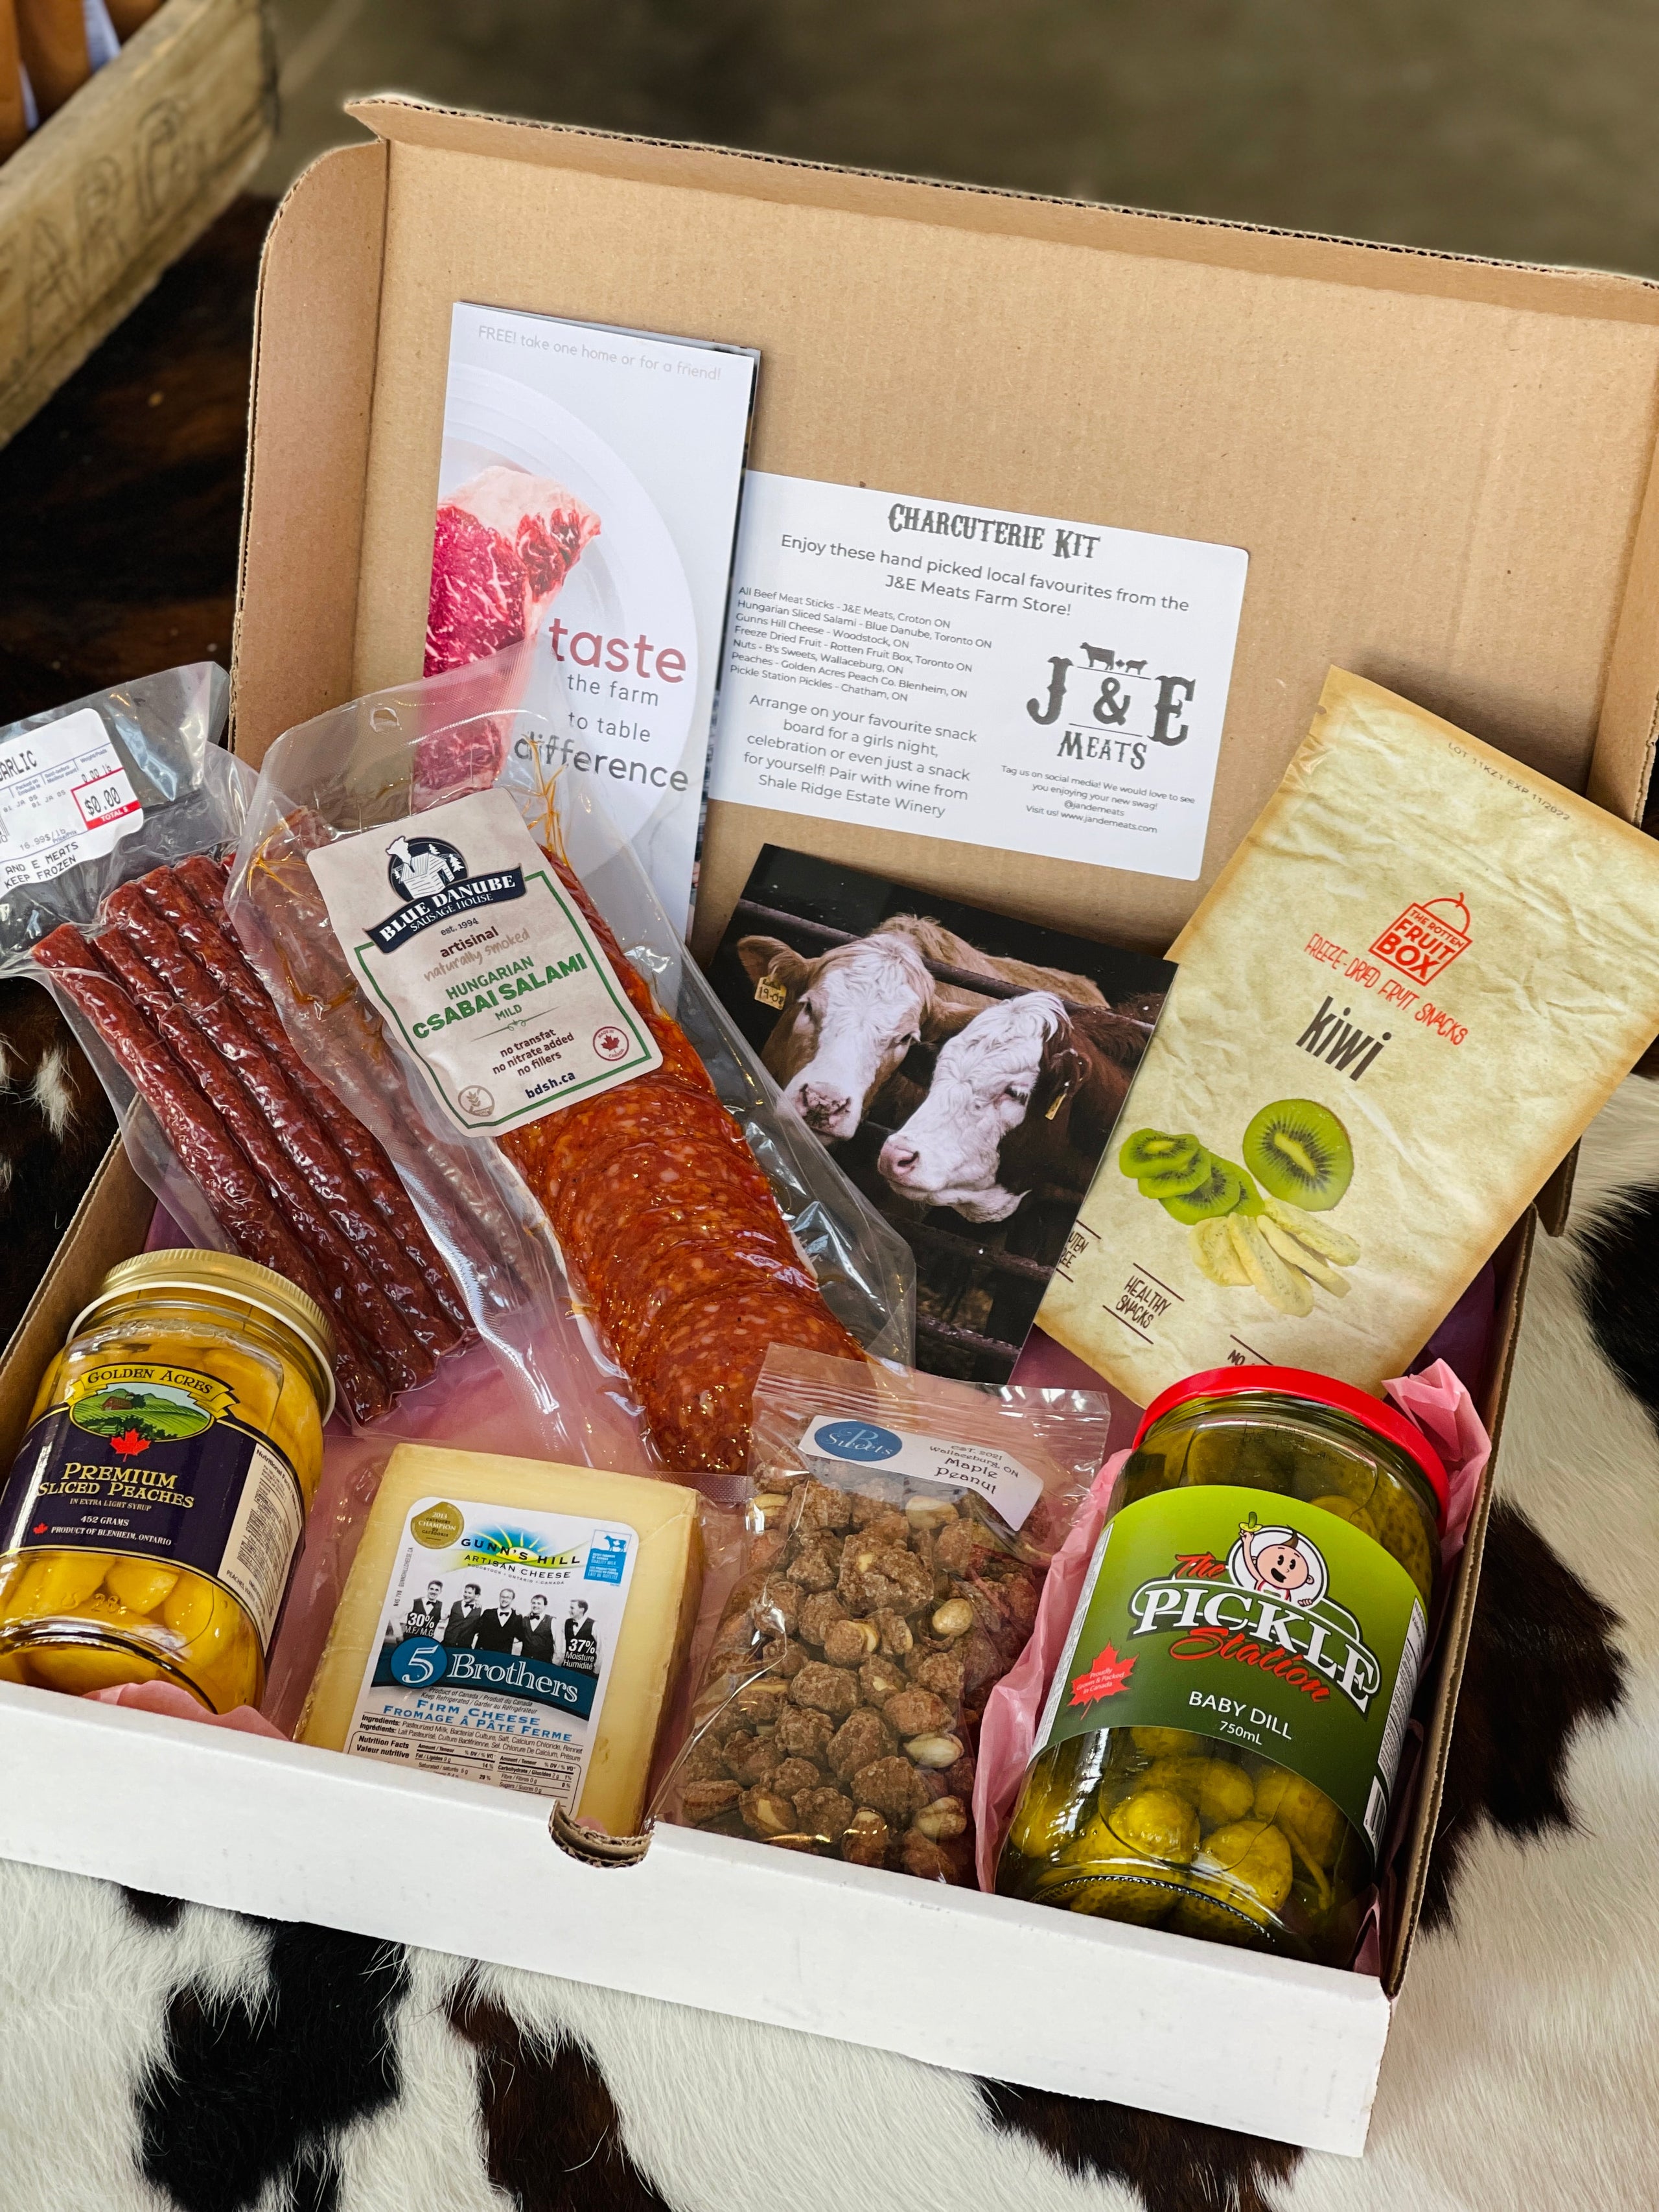 Local Charcuterie Kit | Welcome to J&E Meats